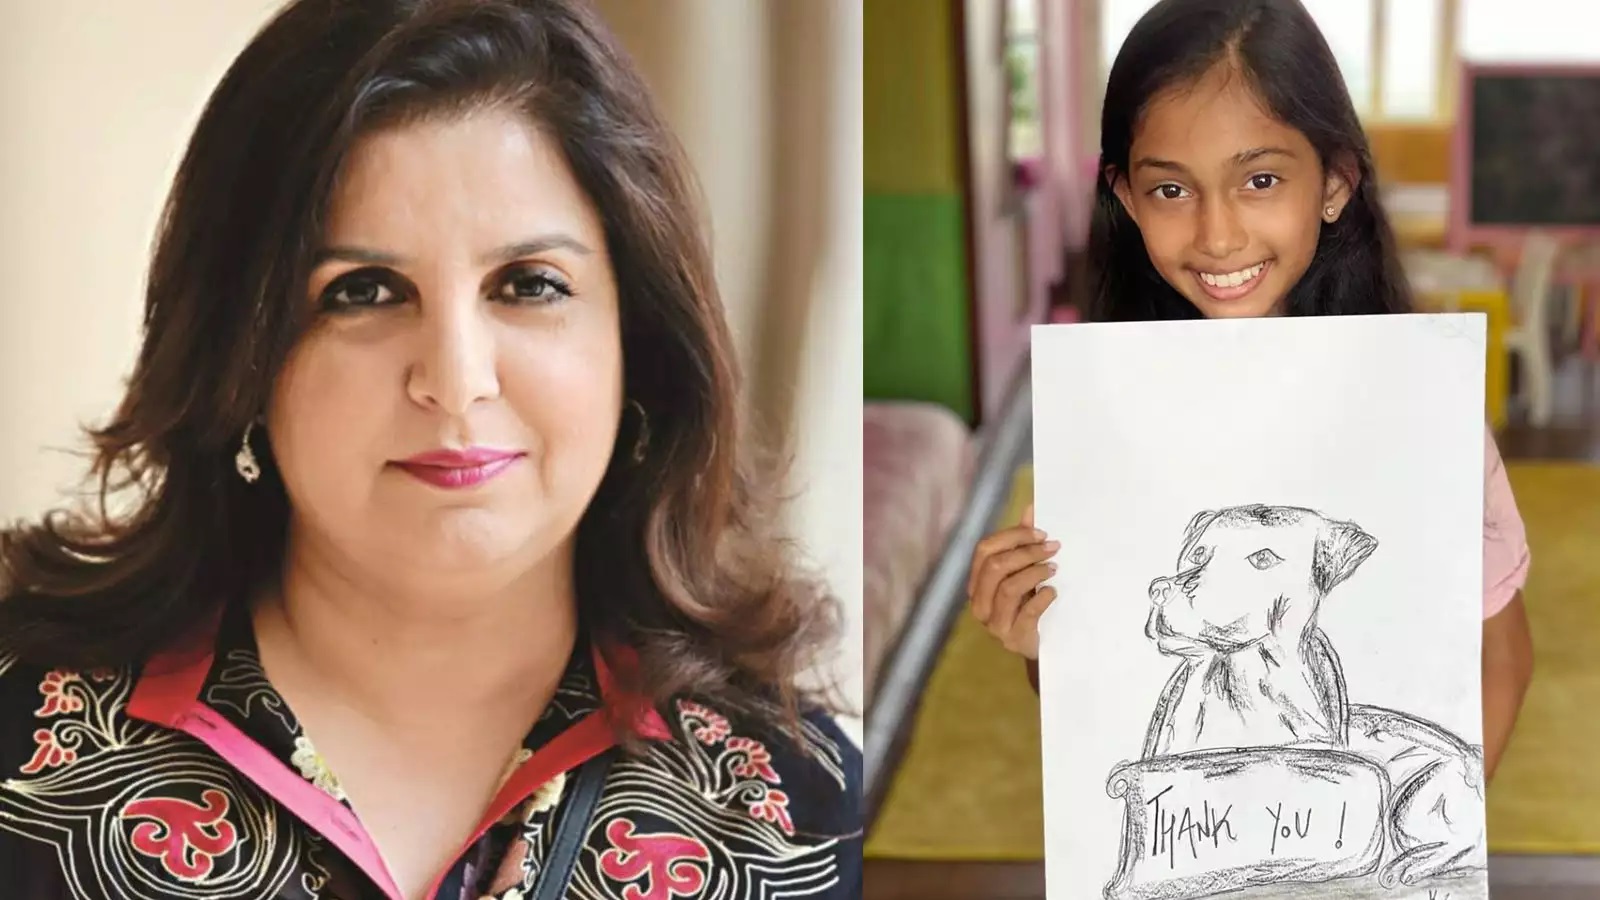 COVID-19: Farah Khan’s daughter raises Rs 2.5 lakh to feed stray animals